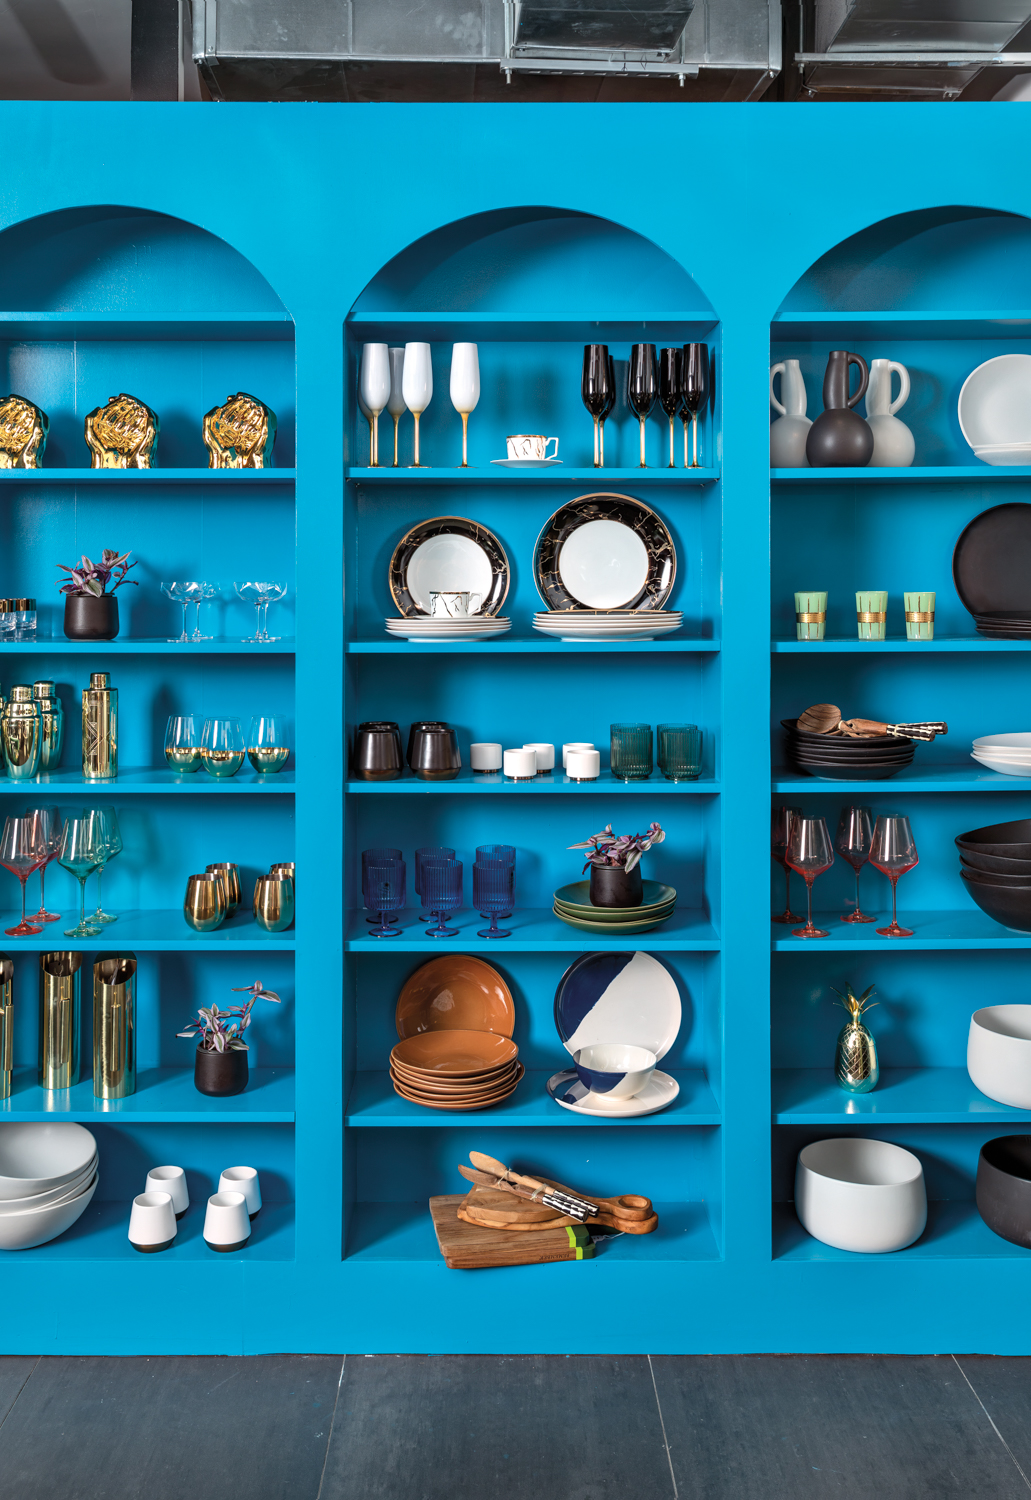 eclectic homewares on vibrant blue shelves in brick-and-mortar shop The Black Home